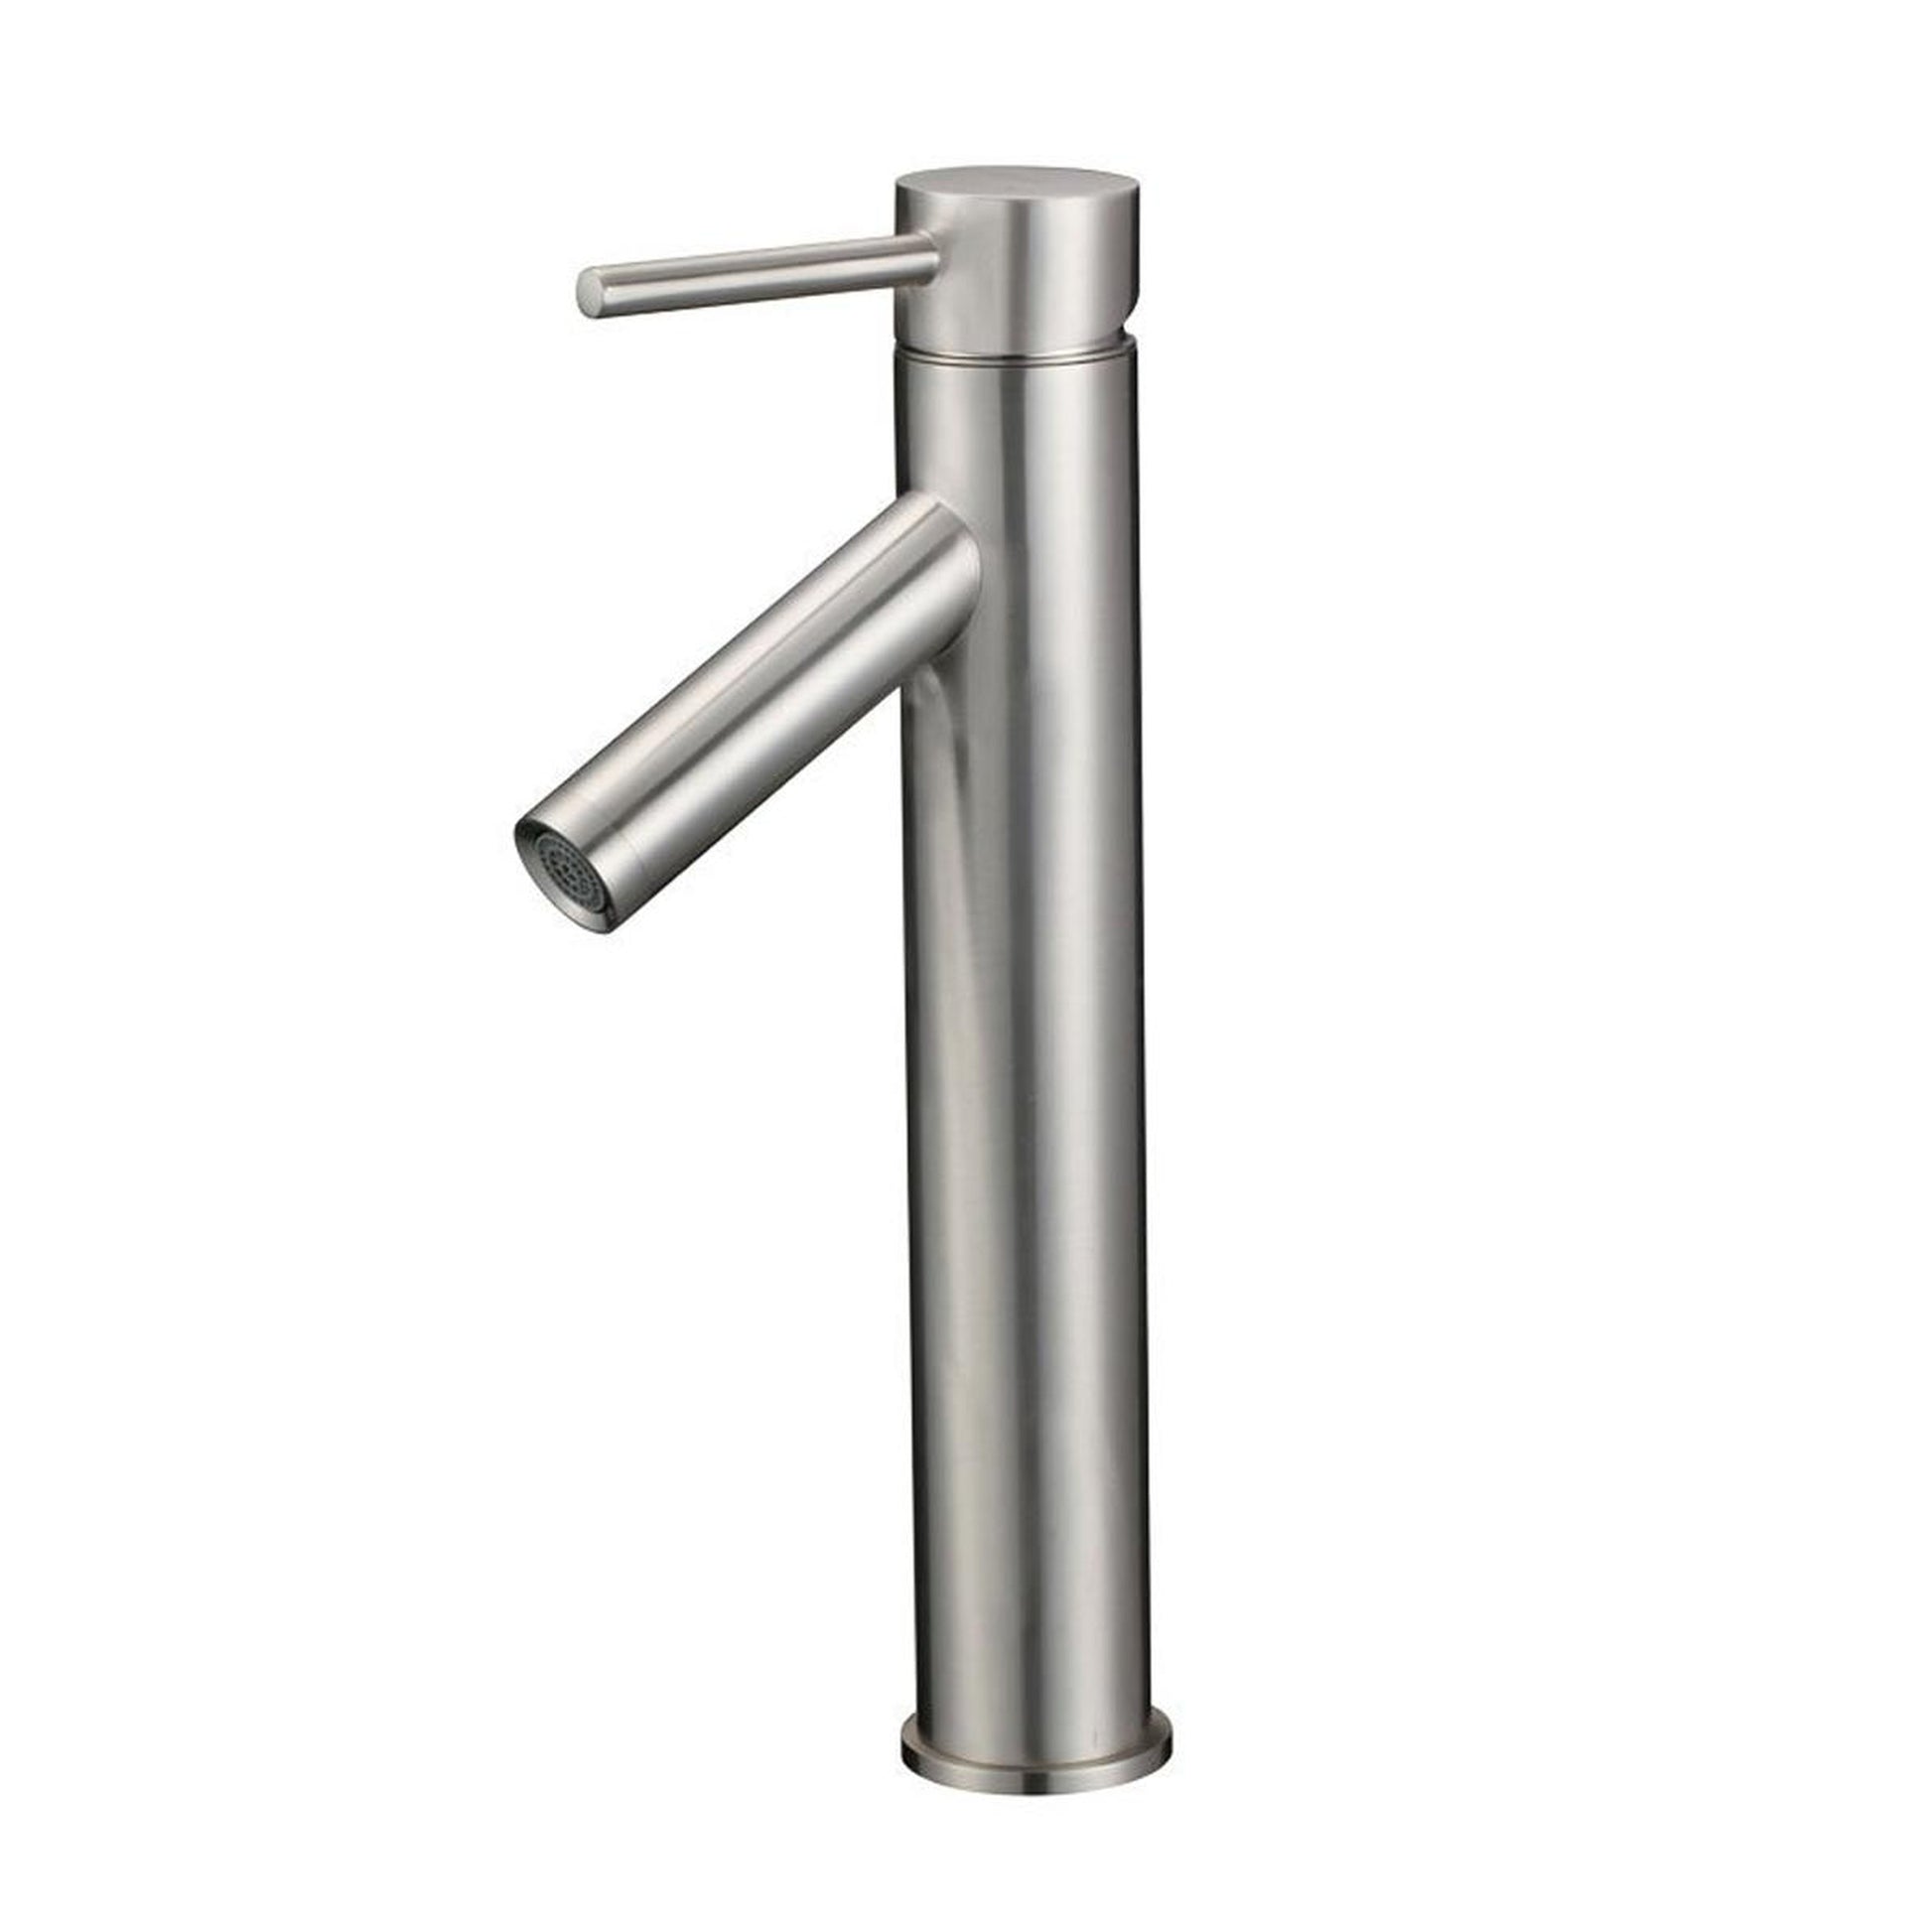 Pelican International Cascade Series PL-8112 Single Hole Vessel Faucet in Brushed Nickel Finish